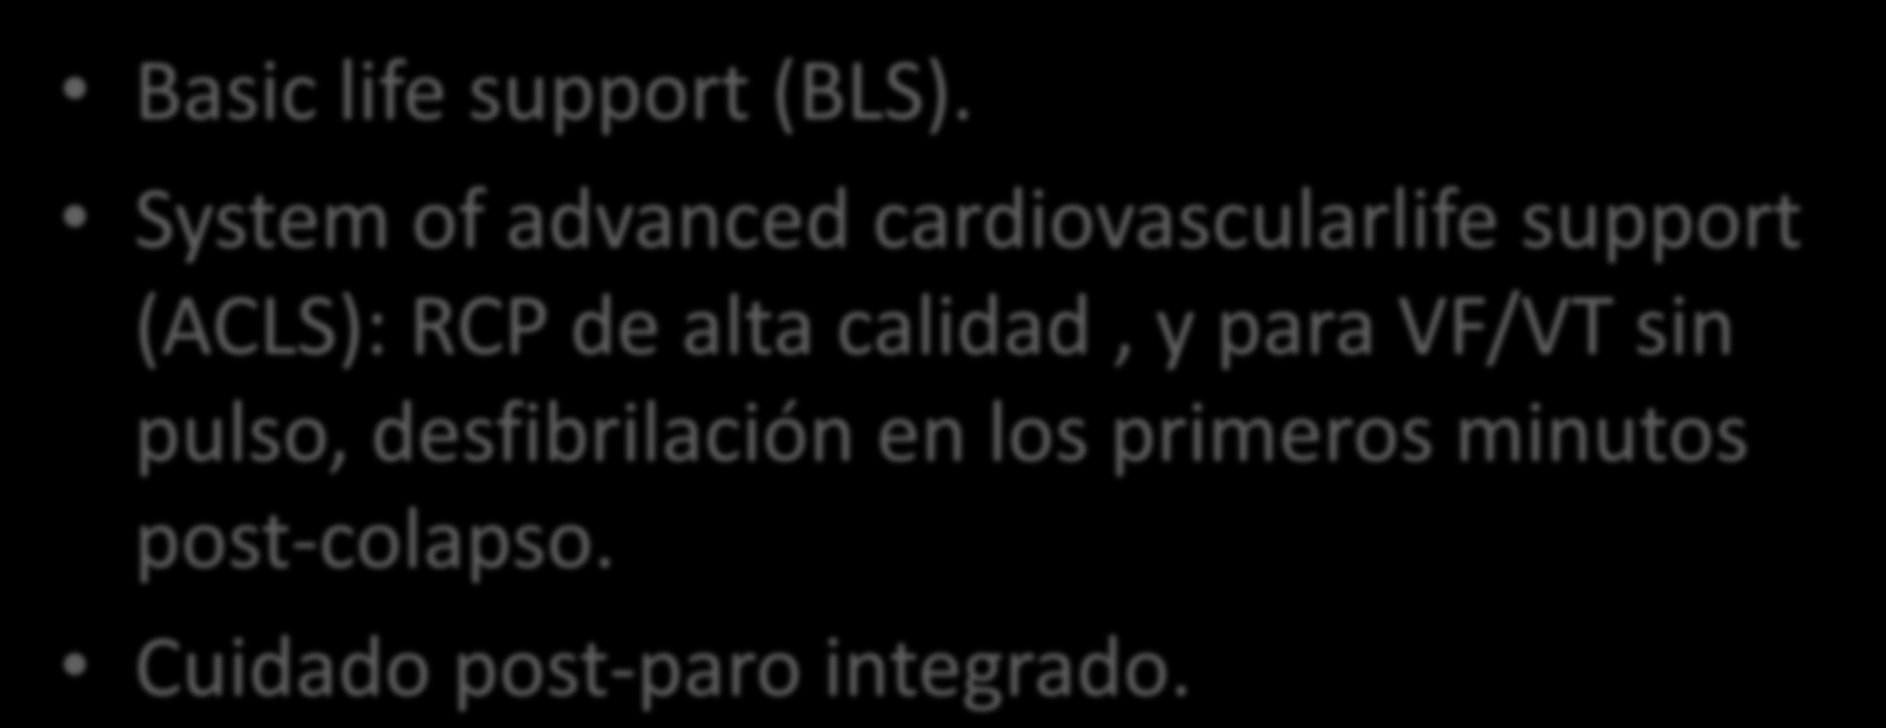 Basic life support (BLS).